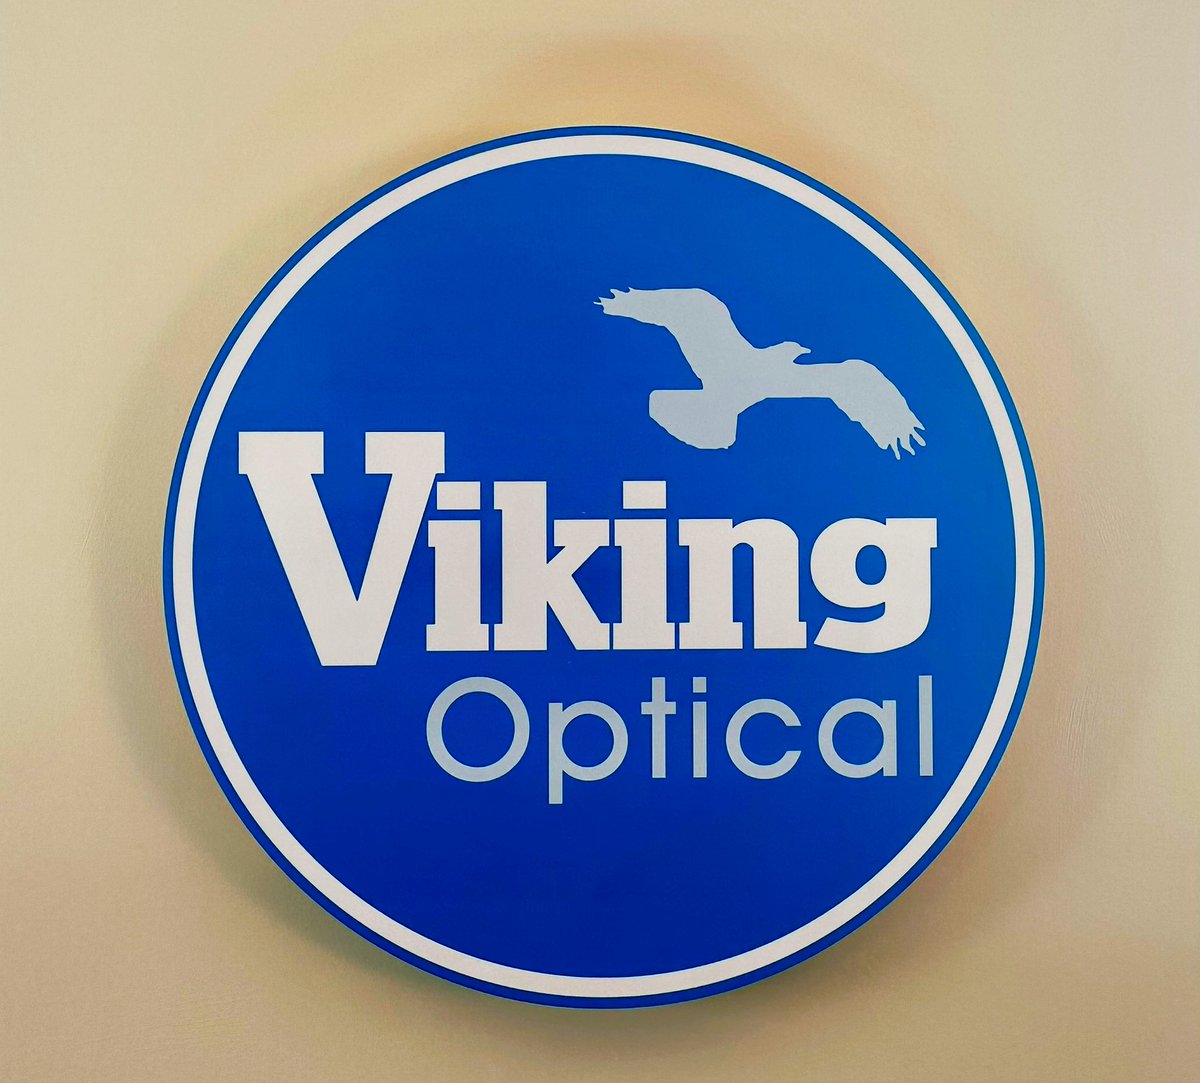 Thrilled to announced that @vikingoptical are now supporting Norfolk Notes! Come walking with us, borrow a pair of binoculars, and see Norfolk in even better detail!